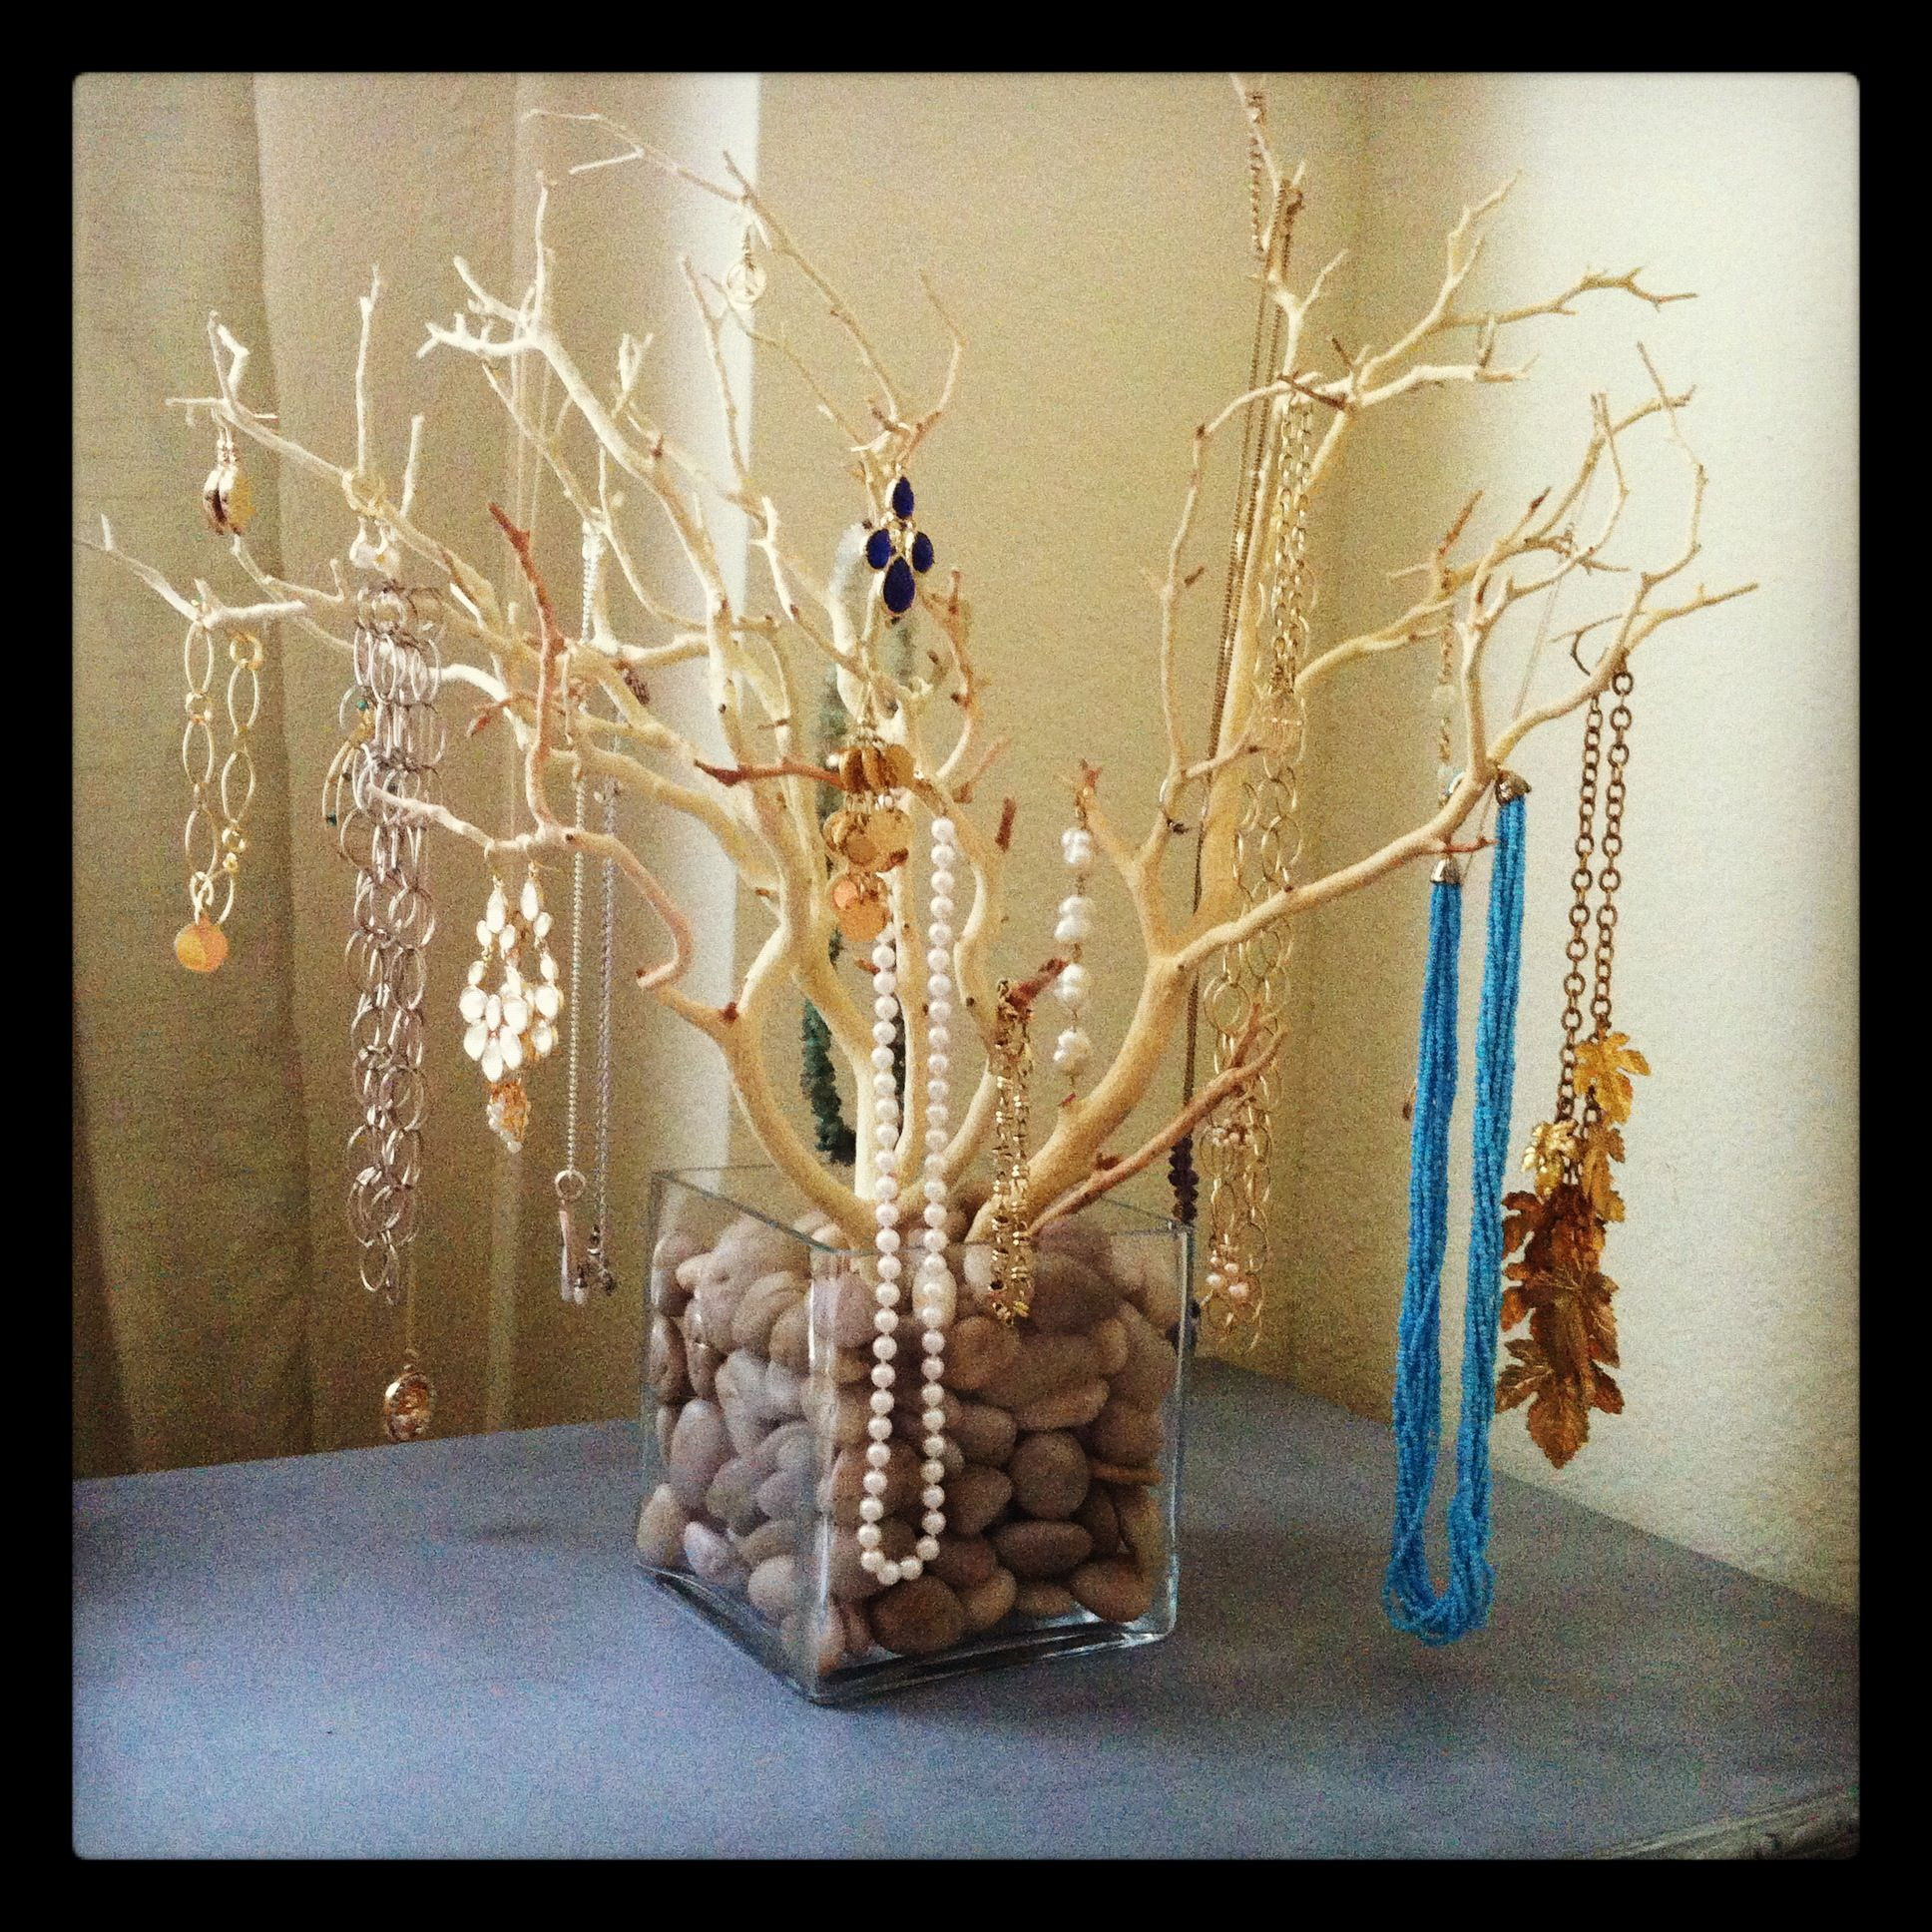 19 Lovable Tree Branch Vase 2022 free download tree branch vase of i found sand blasted manzanita branches online tapped them together with regard to i found sand blasted manzanita branches online tapped them together using electrical ta